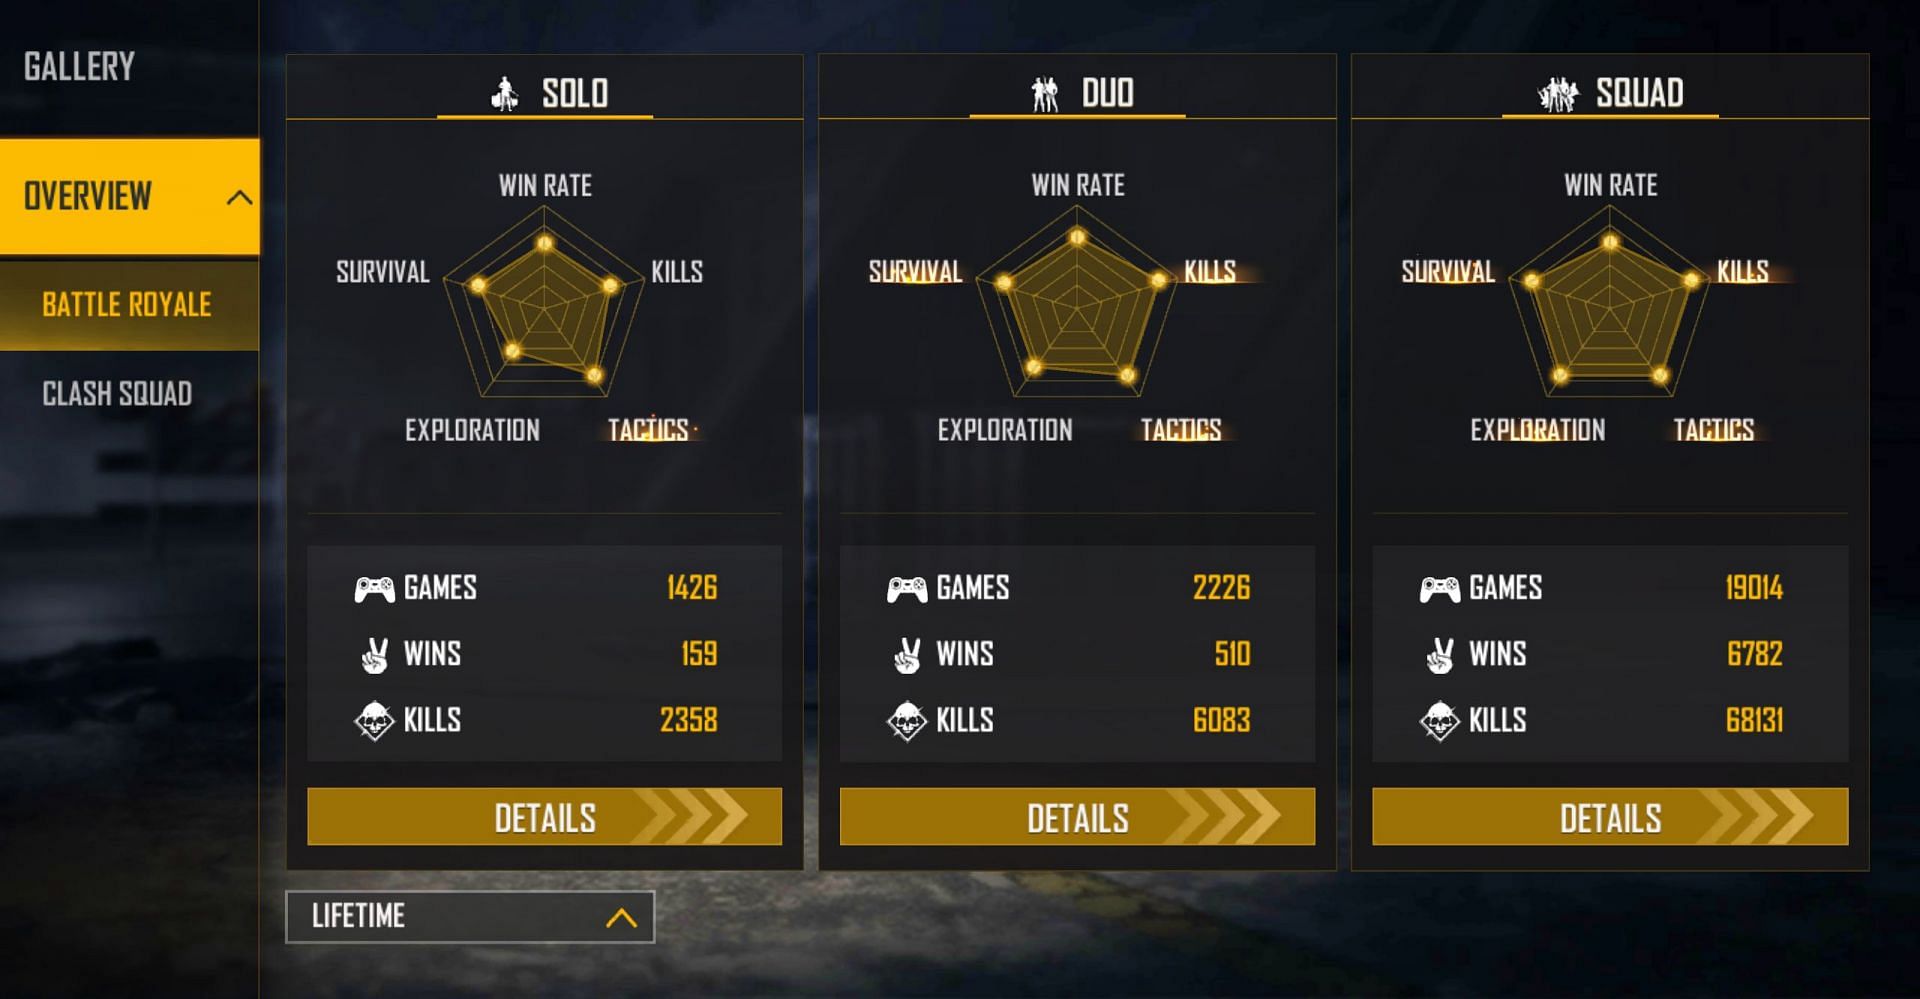 Gyan Gaming has a K/D ratio of 5.57 in squad games (Image via Free Fire)